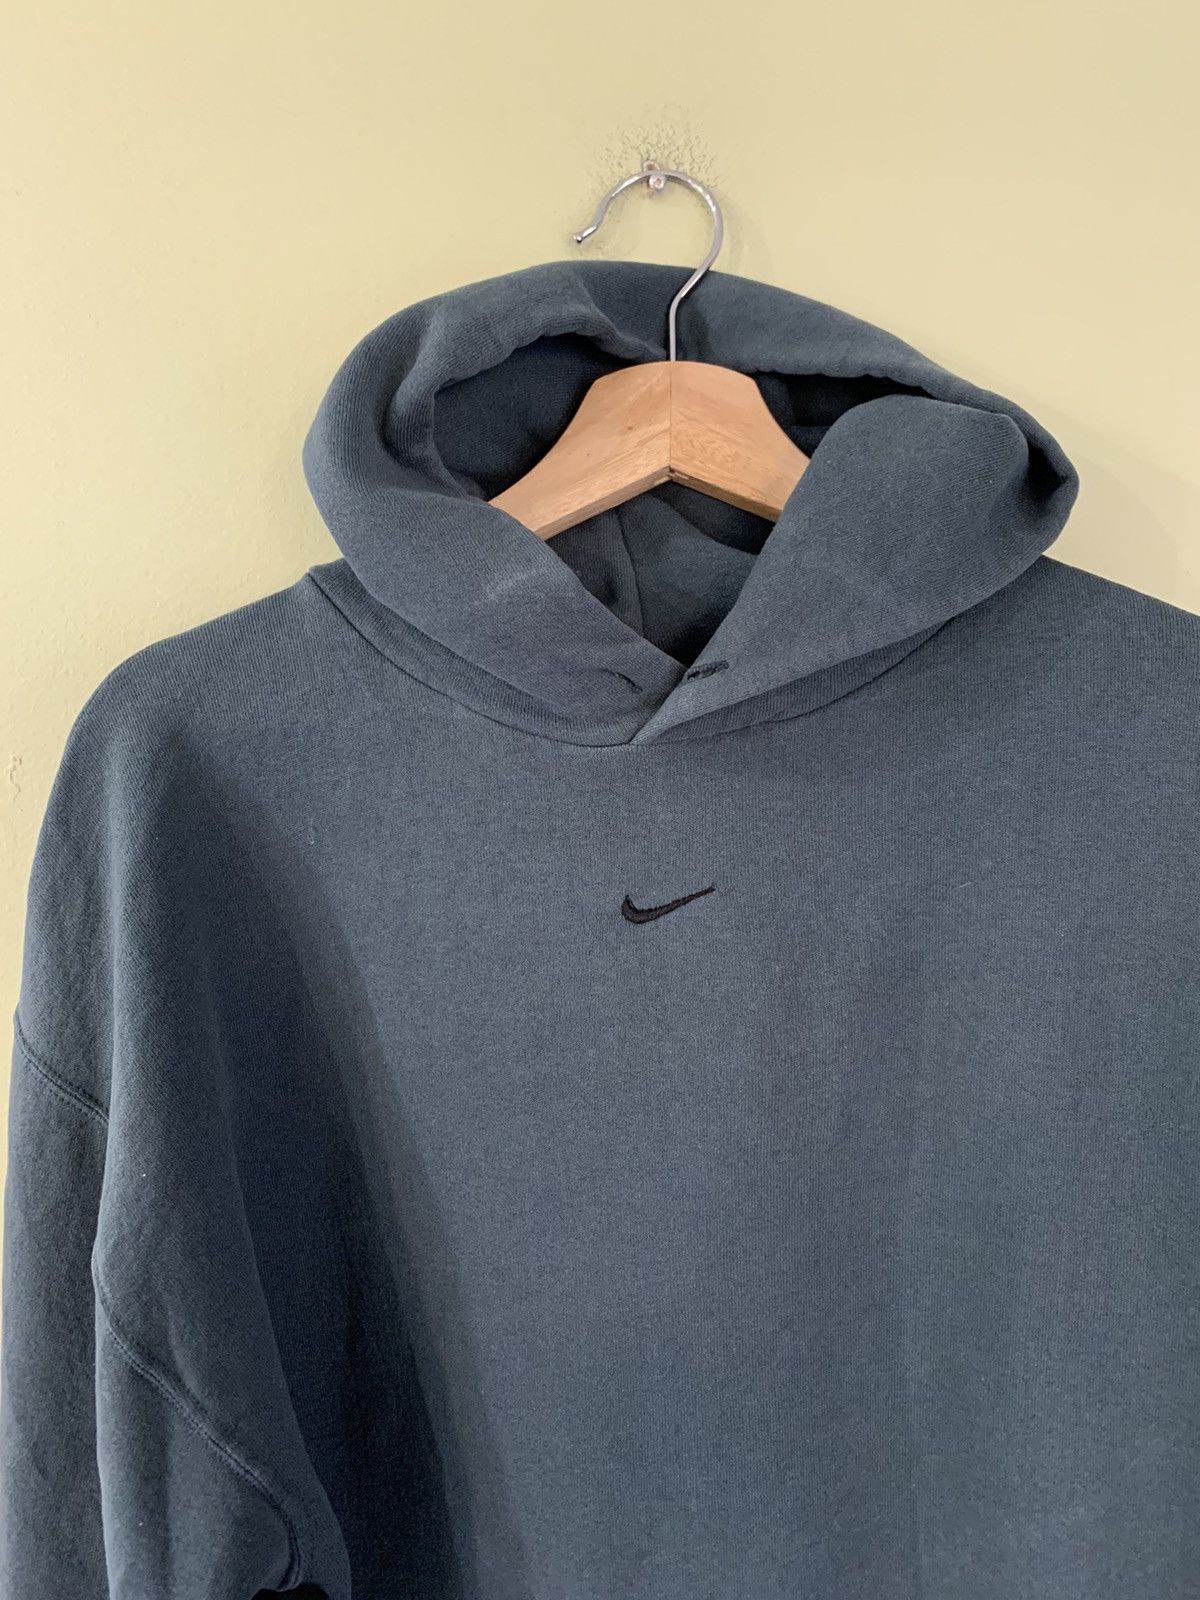 Nike Vintage Nike Center Swoosh Hoodie Check Mid sweater Size US XL / EU 56 / 4 - 1 Preview